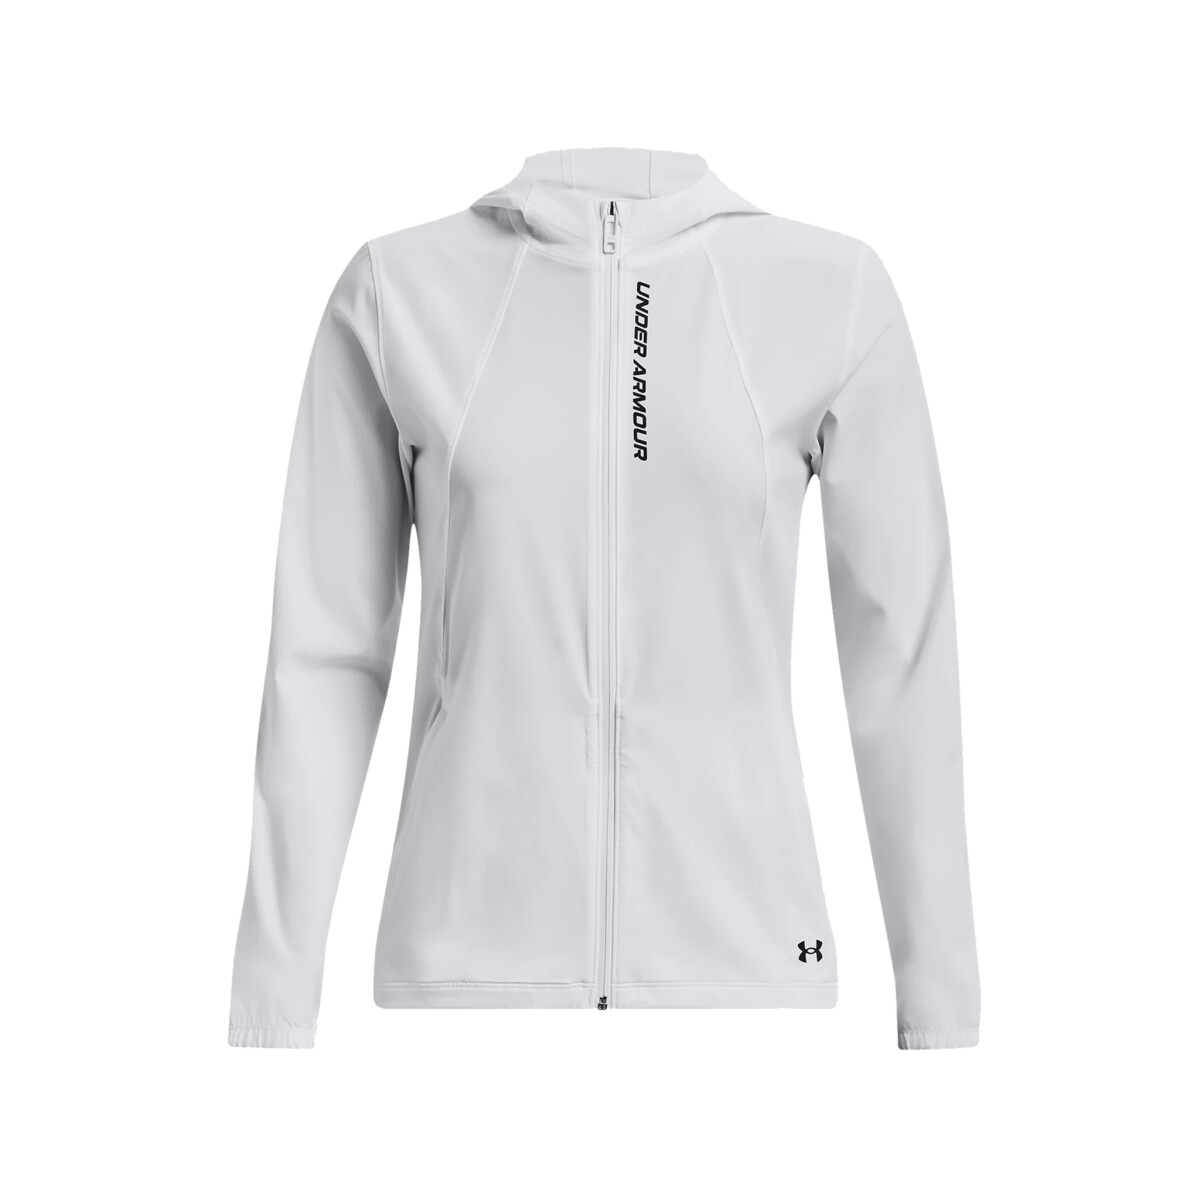 CAMPERA UNDER ARMOUR OUTRUN THE STORM - Black 